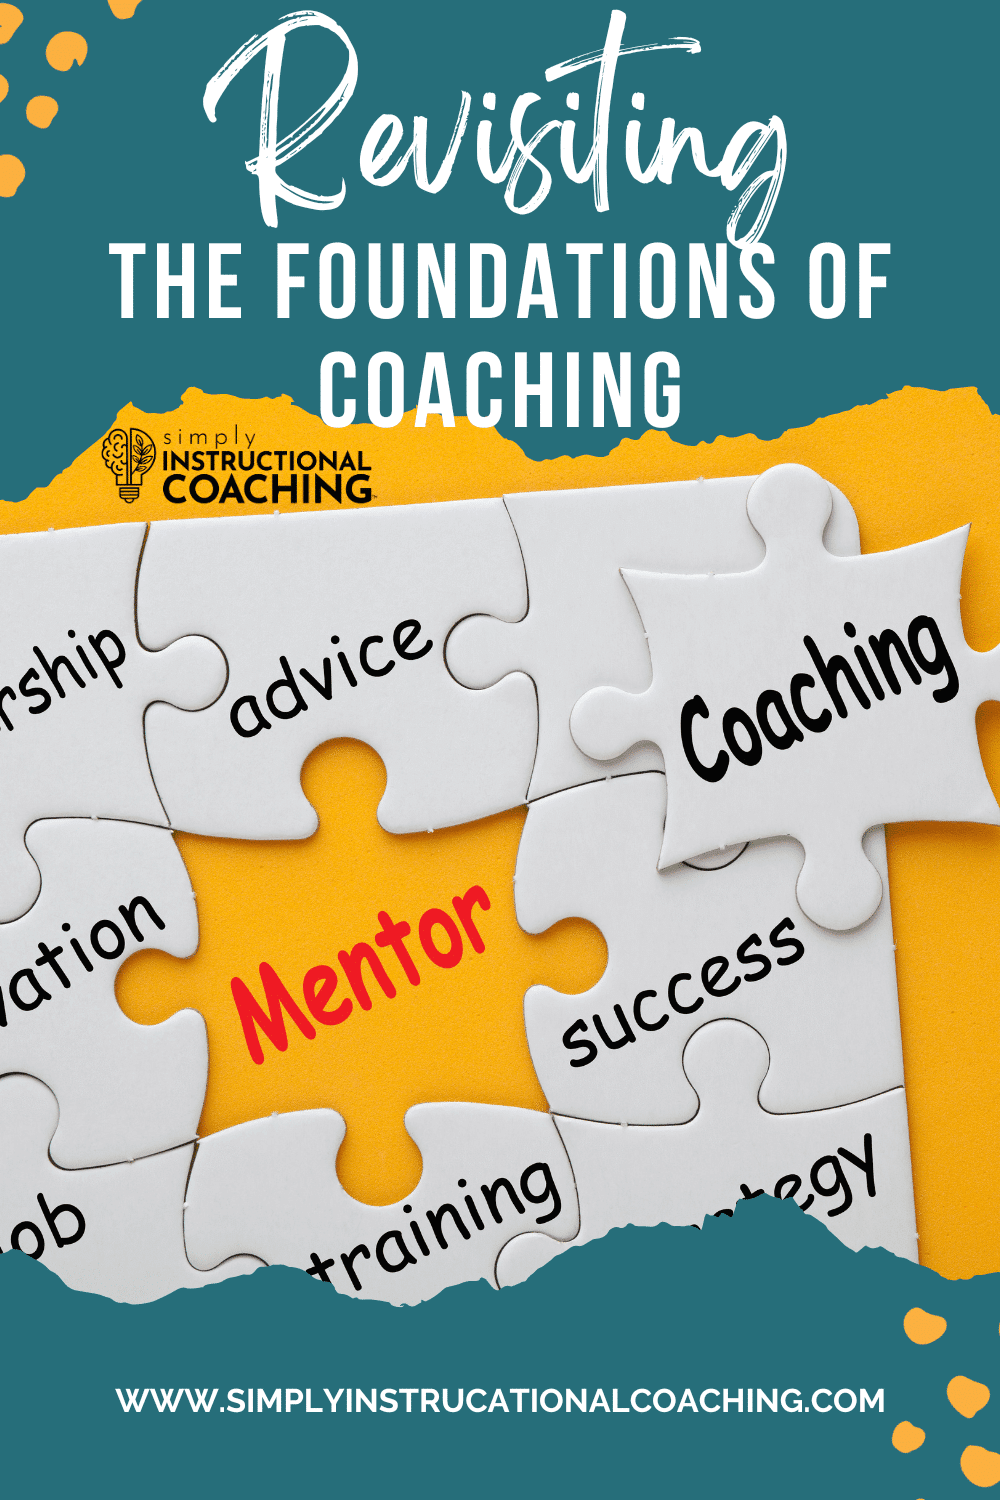 Revisiting the foundations of instructional coaching